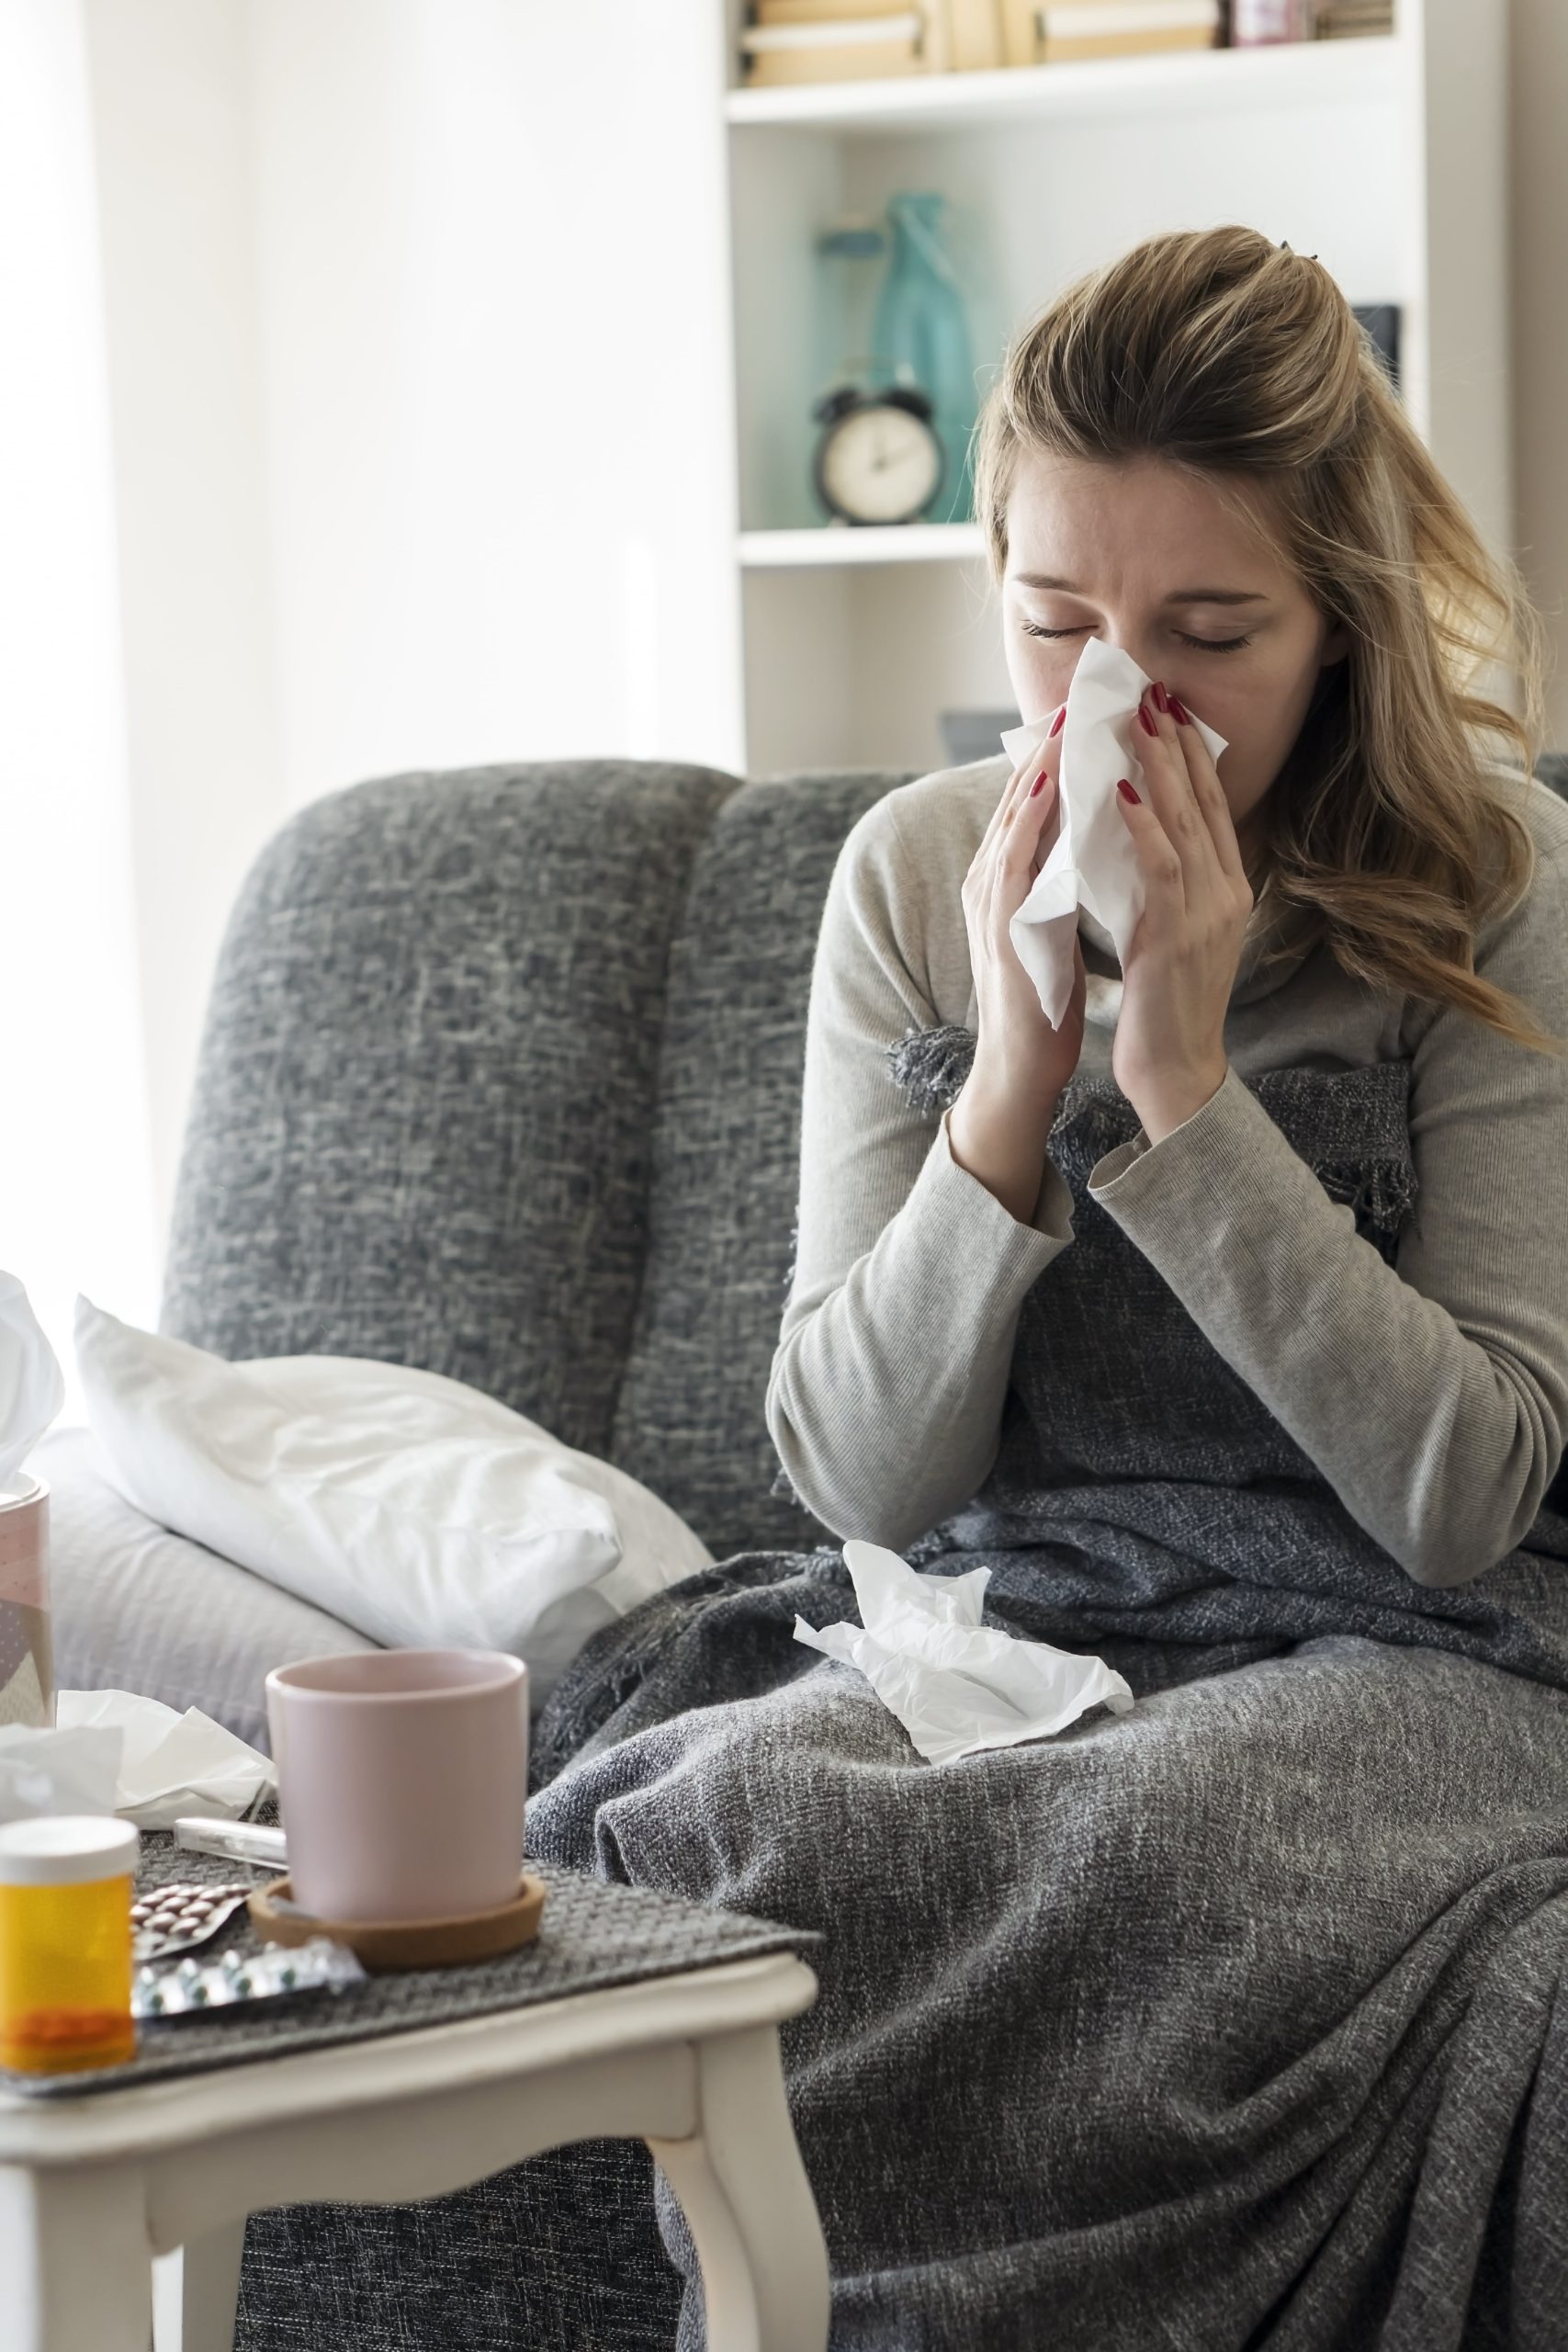  6 Foods That May Aggravate Cold And Cough